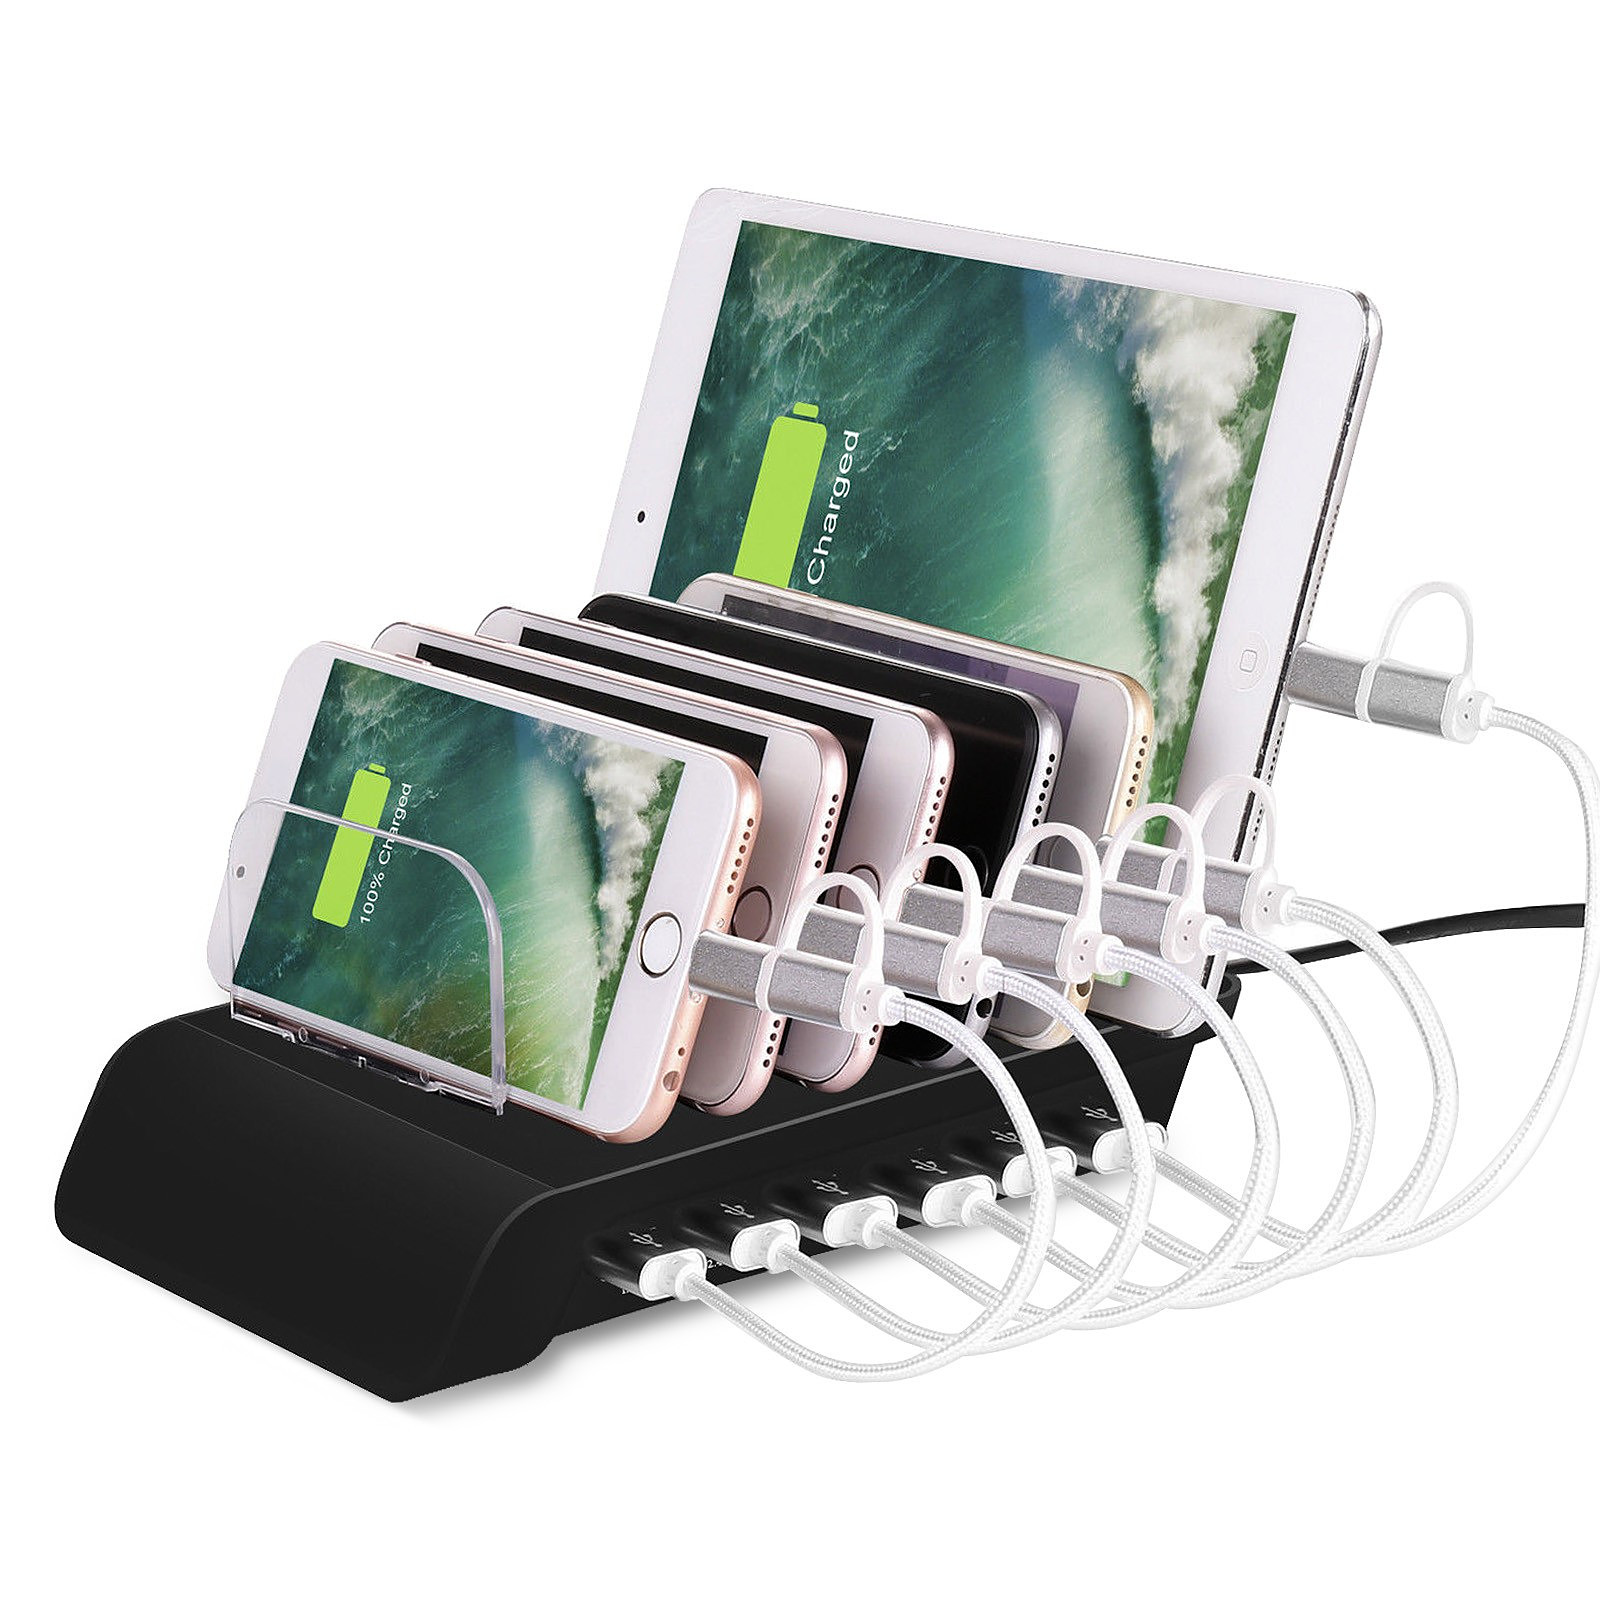 Avizar Station de charge Multi-appareils Base de charge 10.2 A 6 Ports USB 7x Supports - Chargeur telephone Avizar